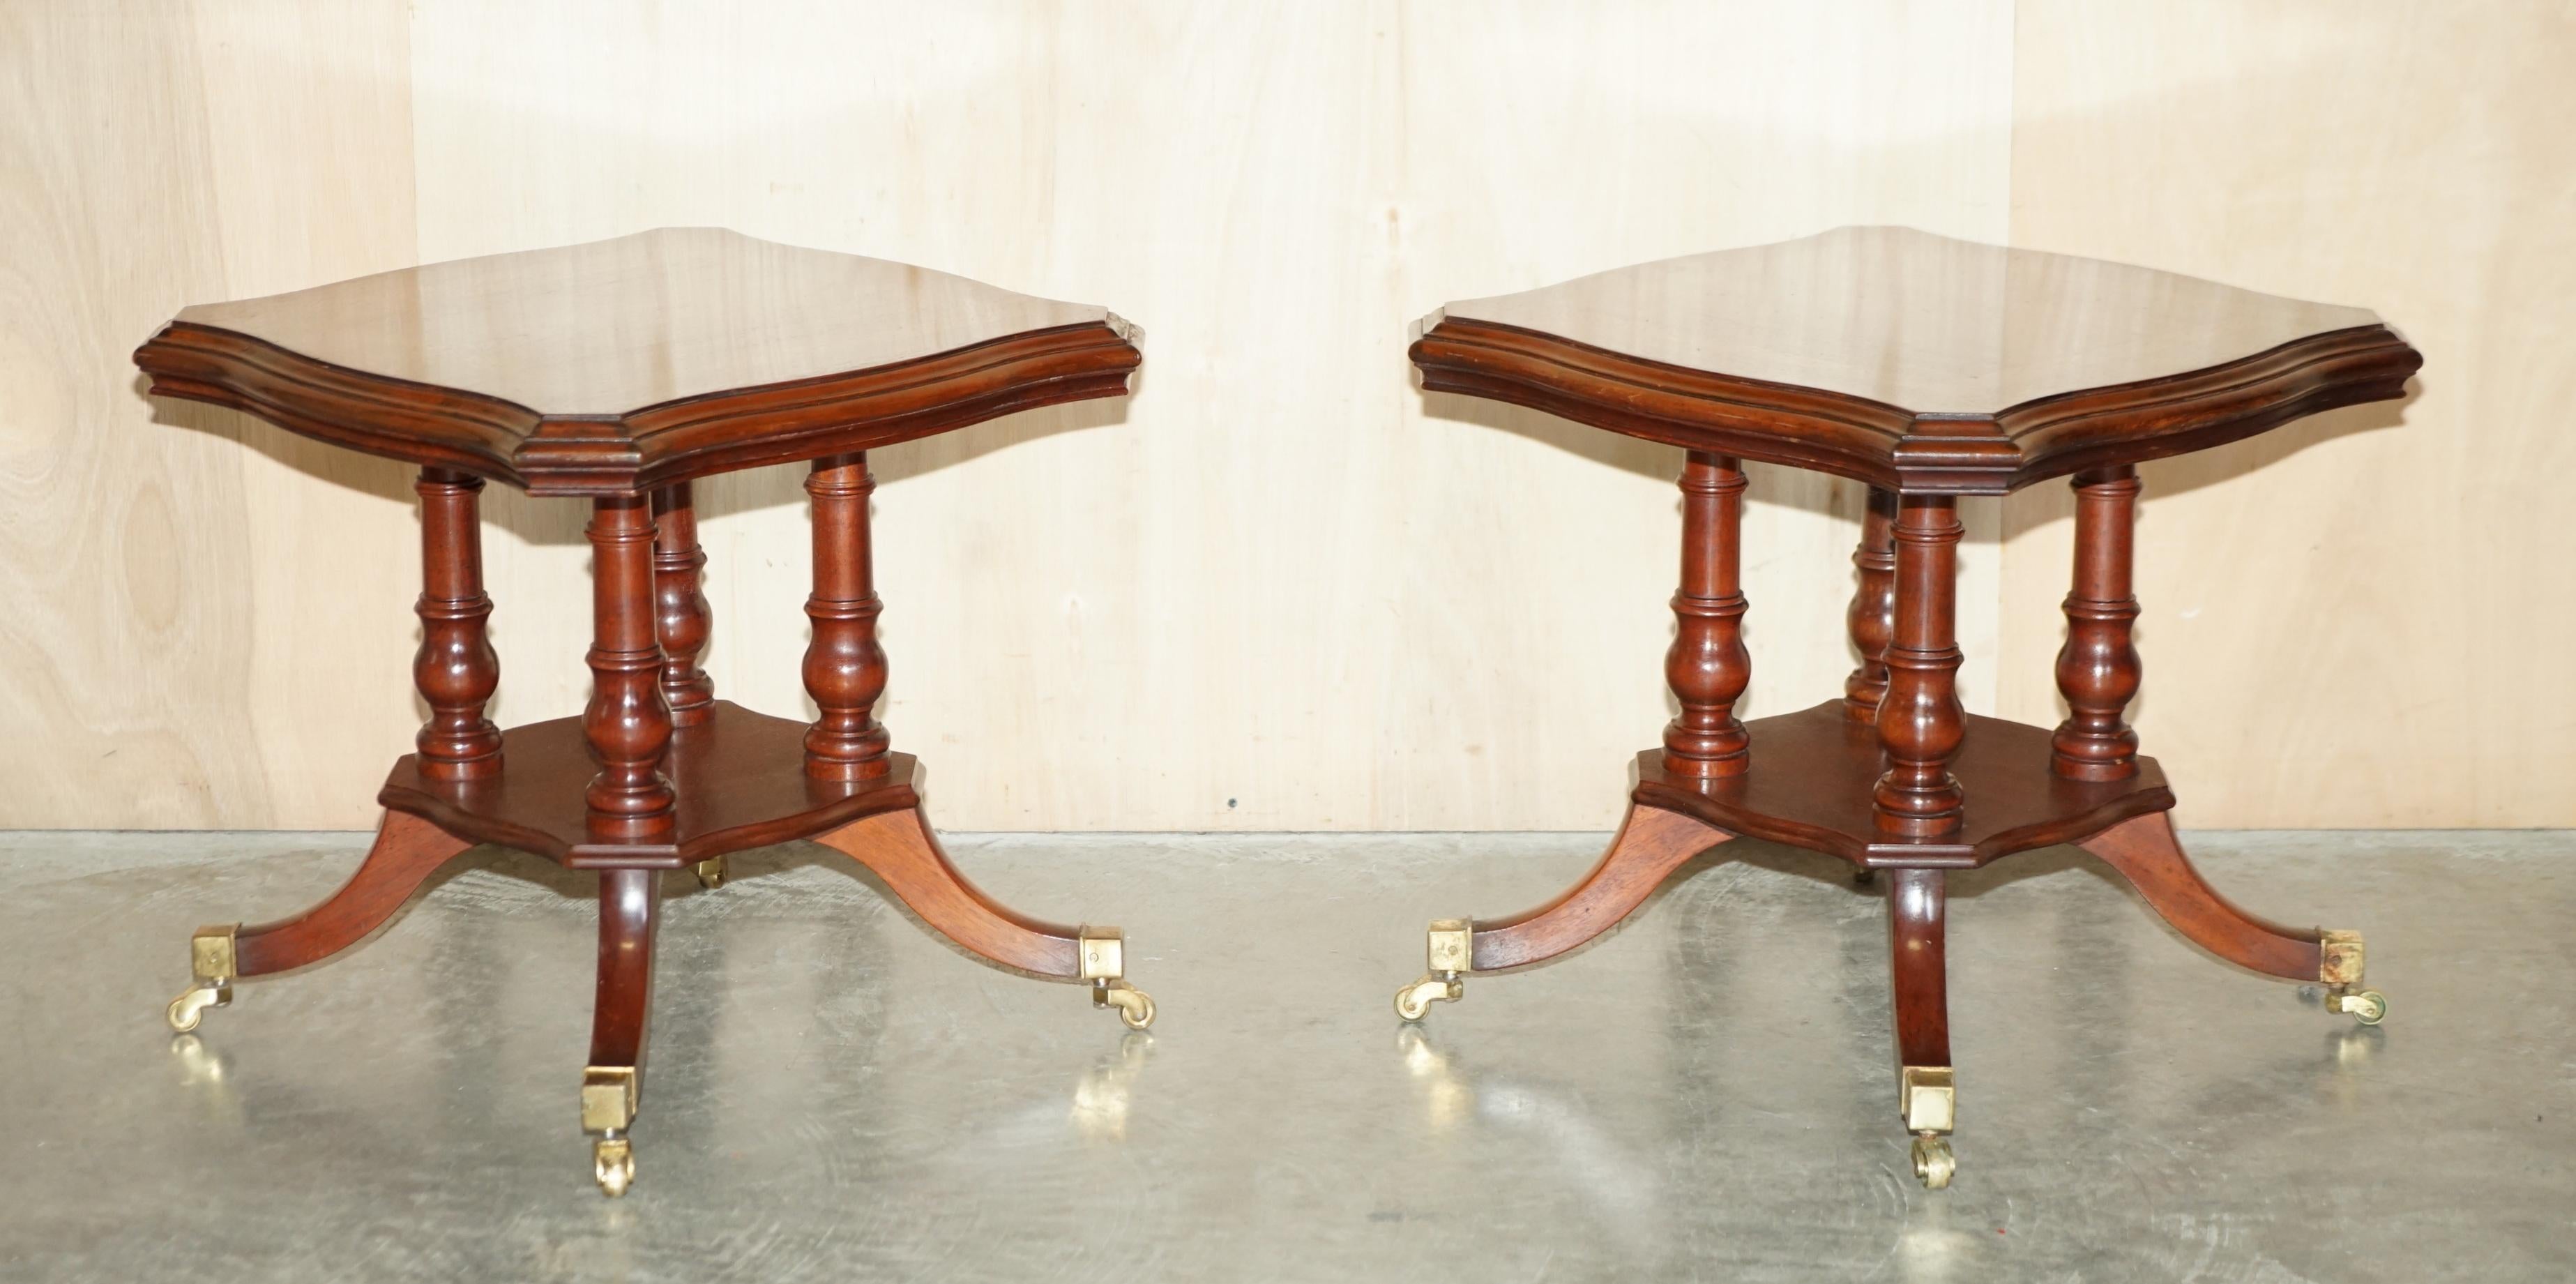 We are delighted to offer for sale this lovely unique pair of fully restored side end lamp wine tables with solid English brass castors.
A good looking well made and desirable pair of tables, they have a quatrefoil formed base which is made up of